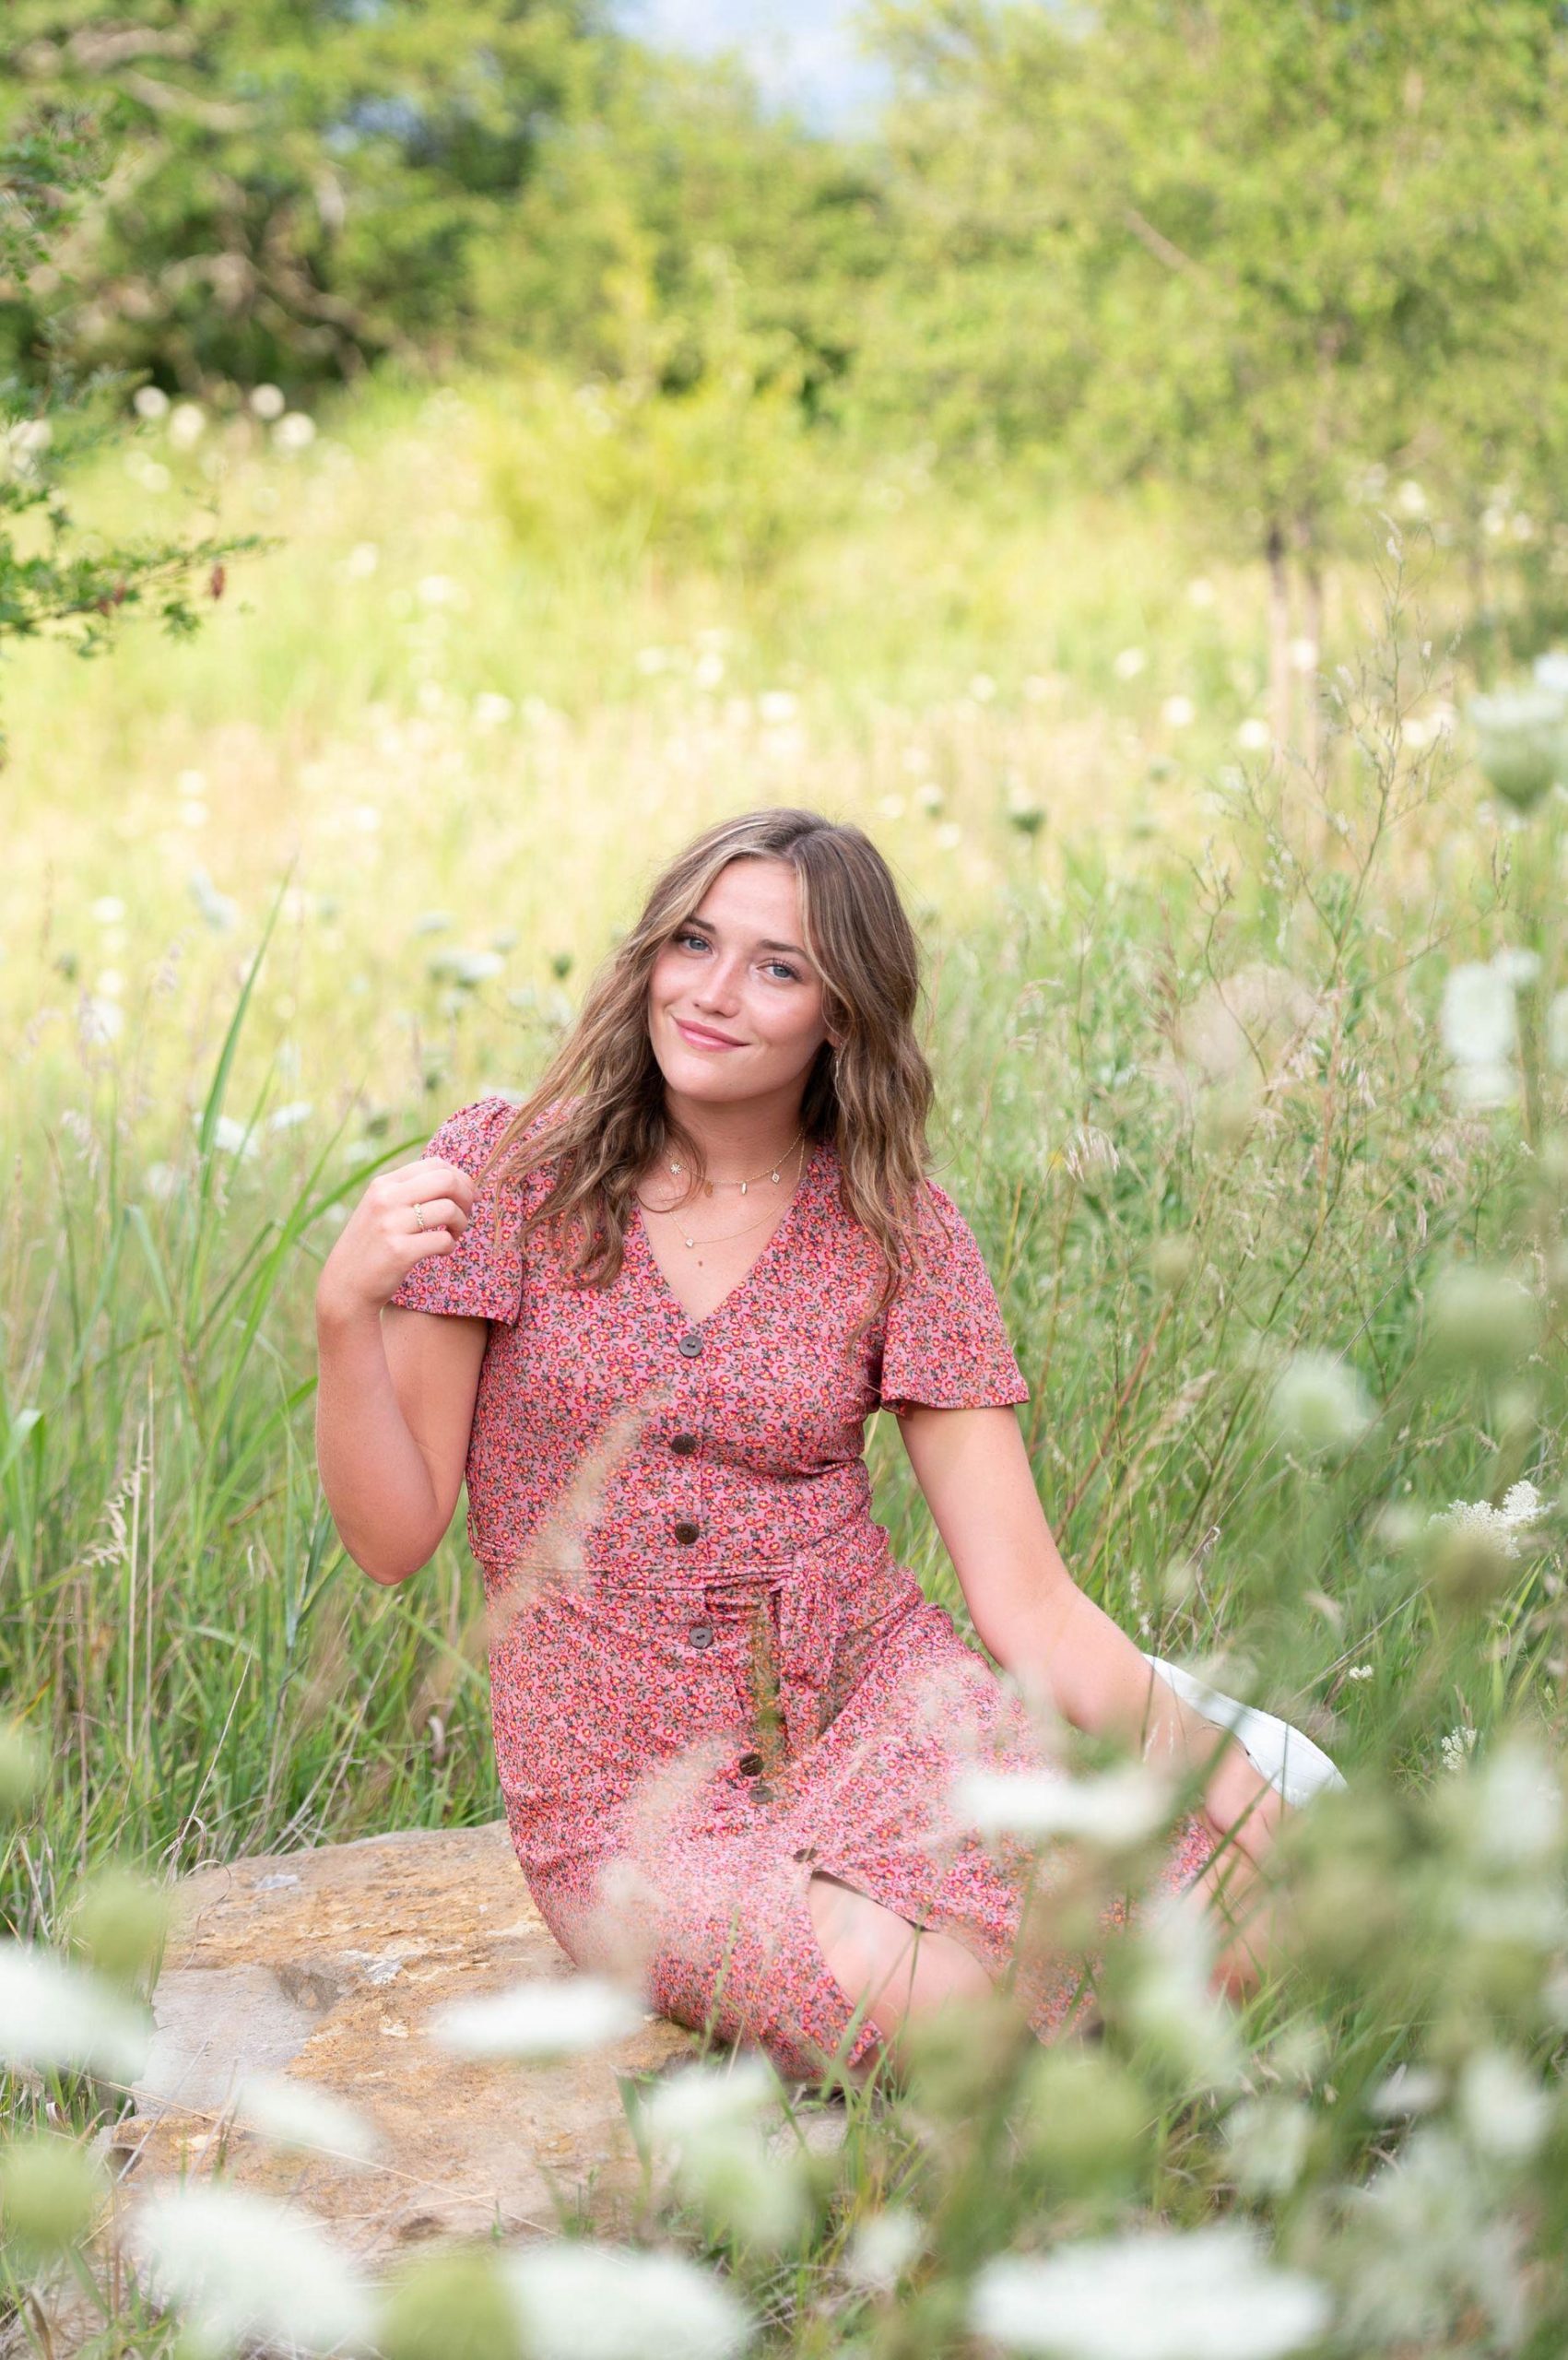 Best Time to Book My Senior Photo: Senior Girl in grass and wild flowers in the spring